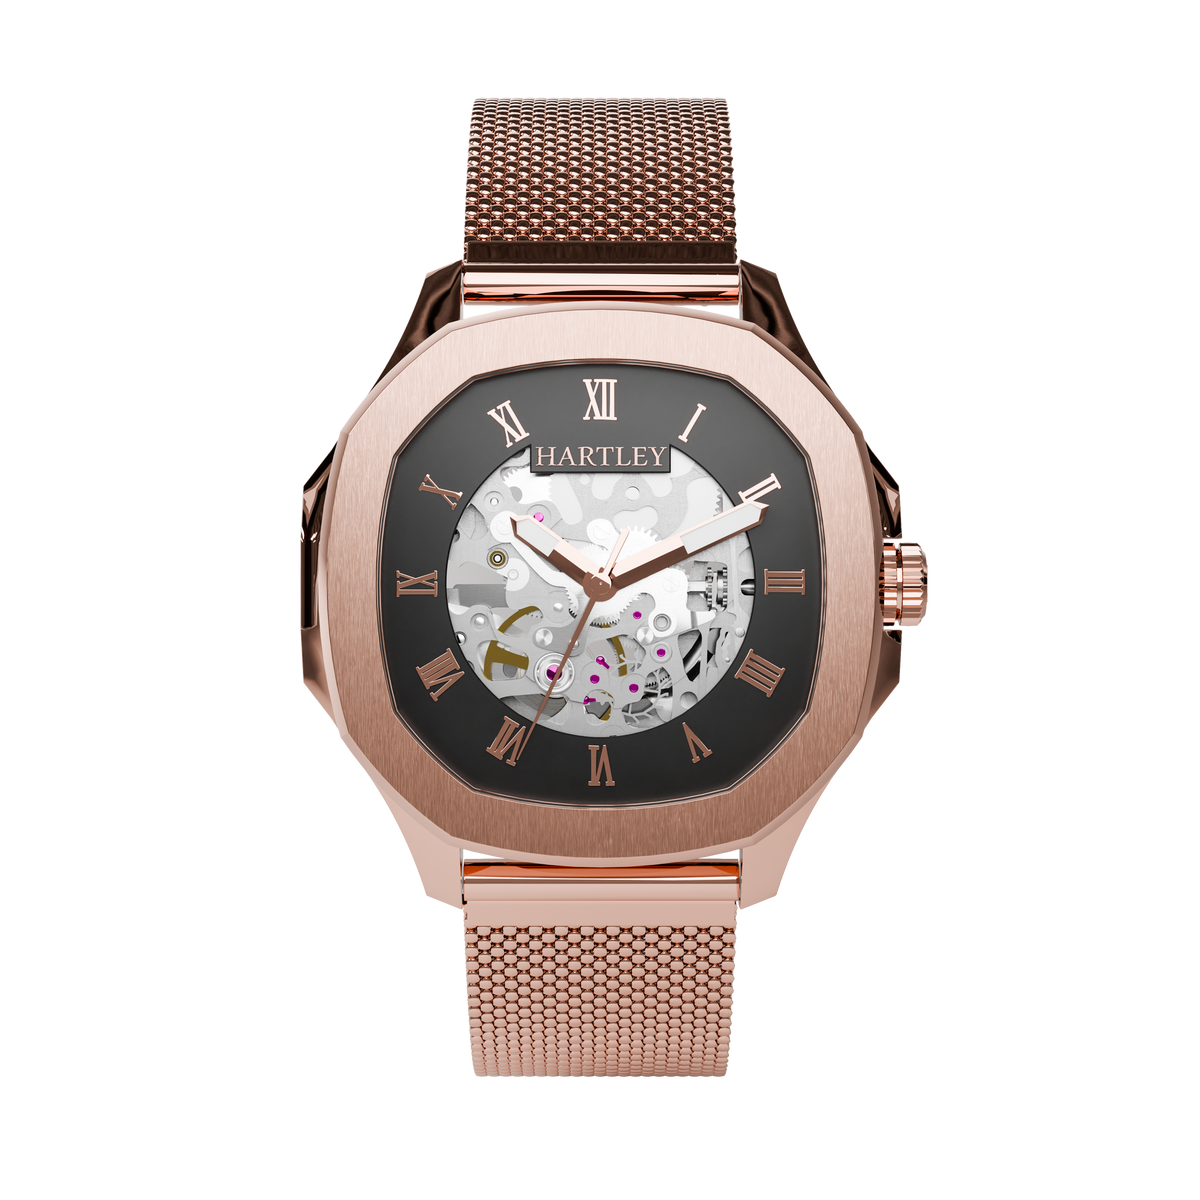 HARTLEY LEGACY ROSE GOLD MESH FRONTAL VIEW